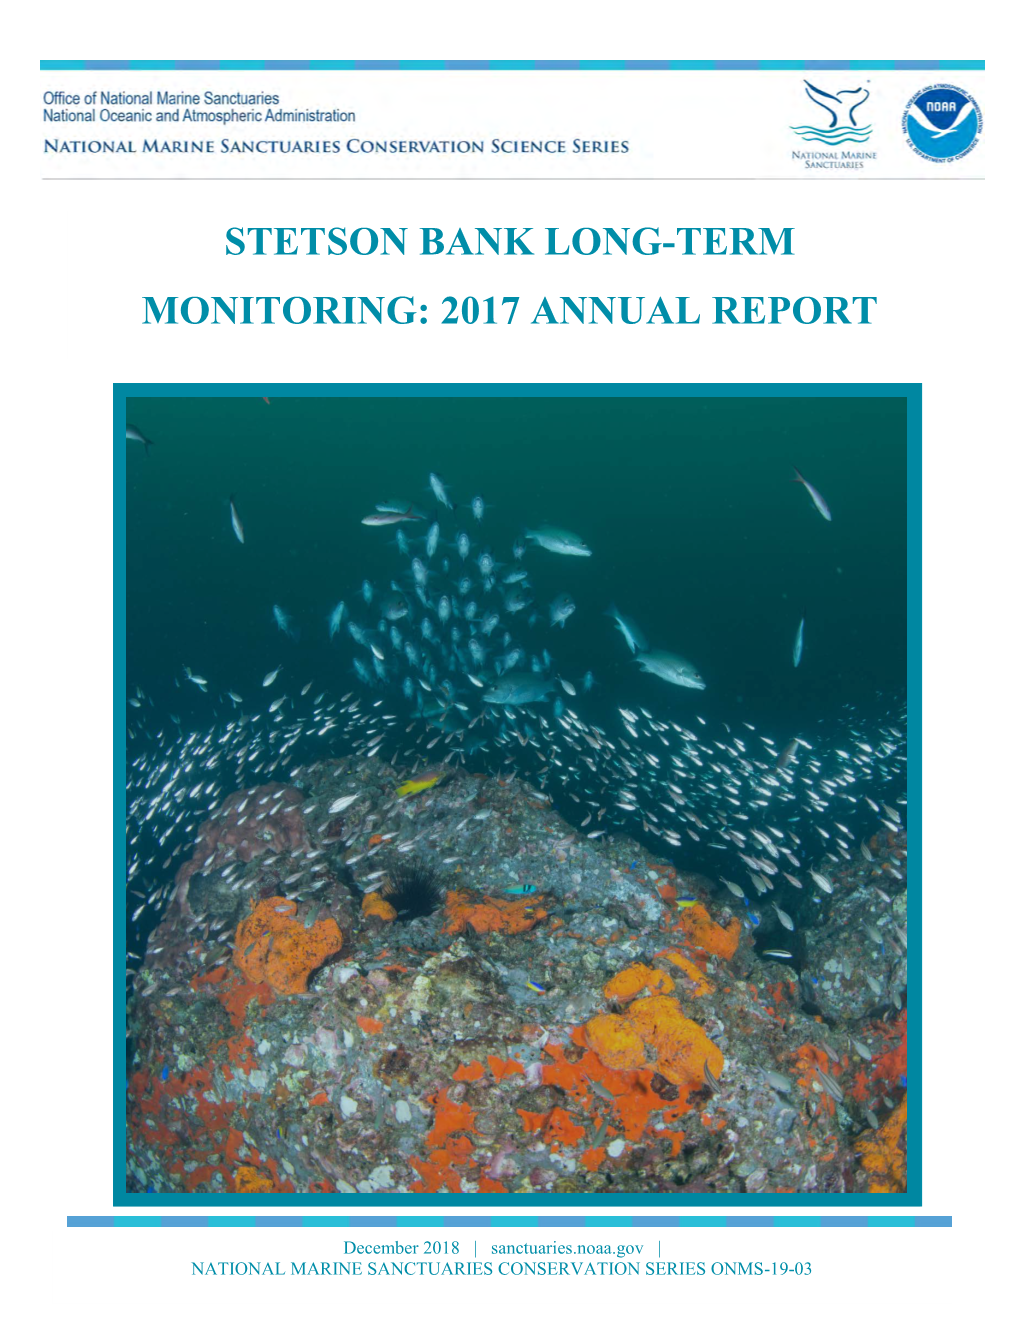 Stetson Bank Long-Term Monitoring: 2017 Annual Report